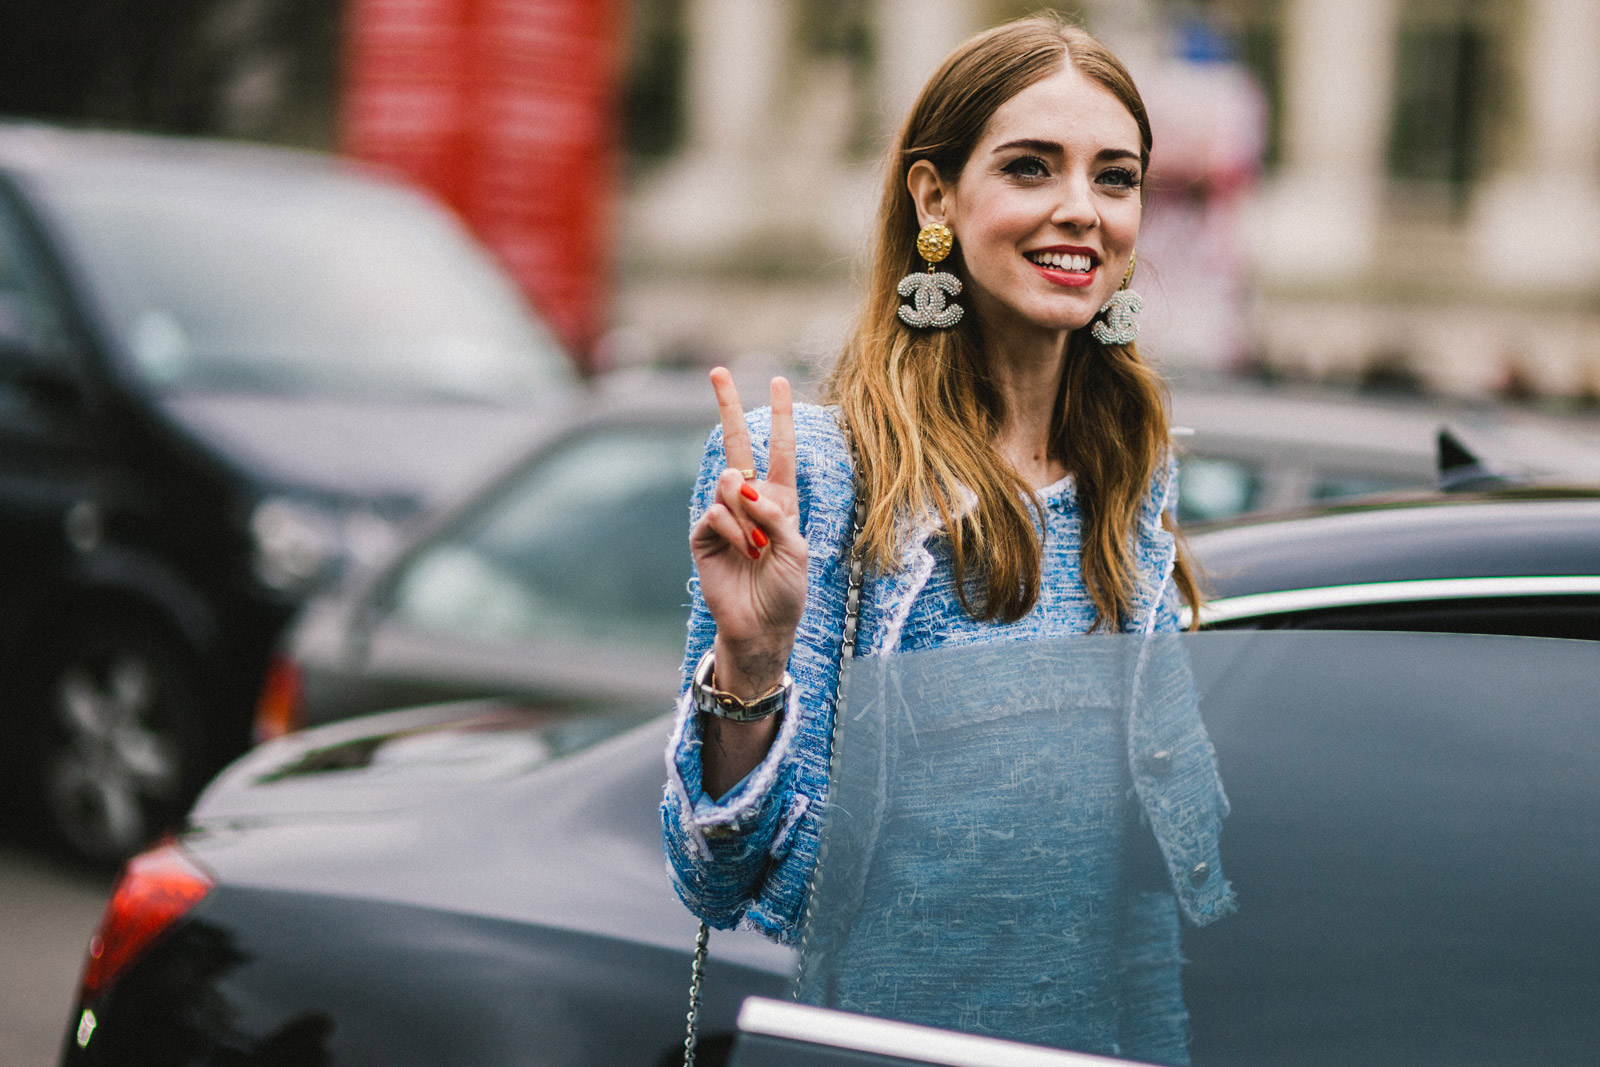 Chiara Ferragni wearing a total Chanel outfit after the Chanel Fall/Winter 2015-2016 fashion show in Paris, France